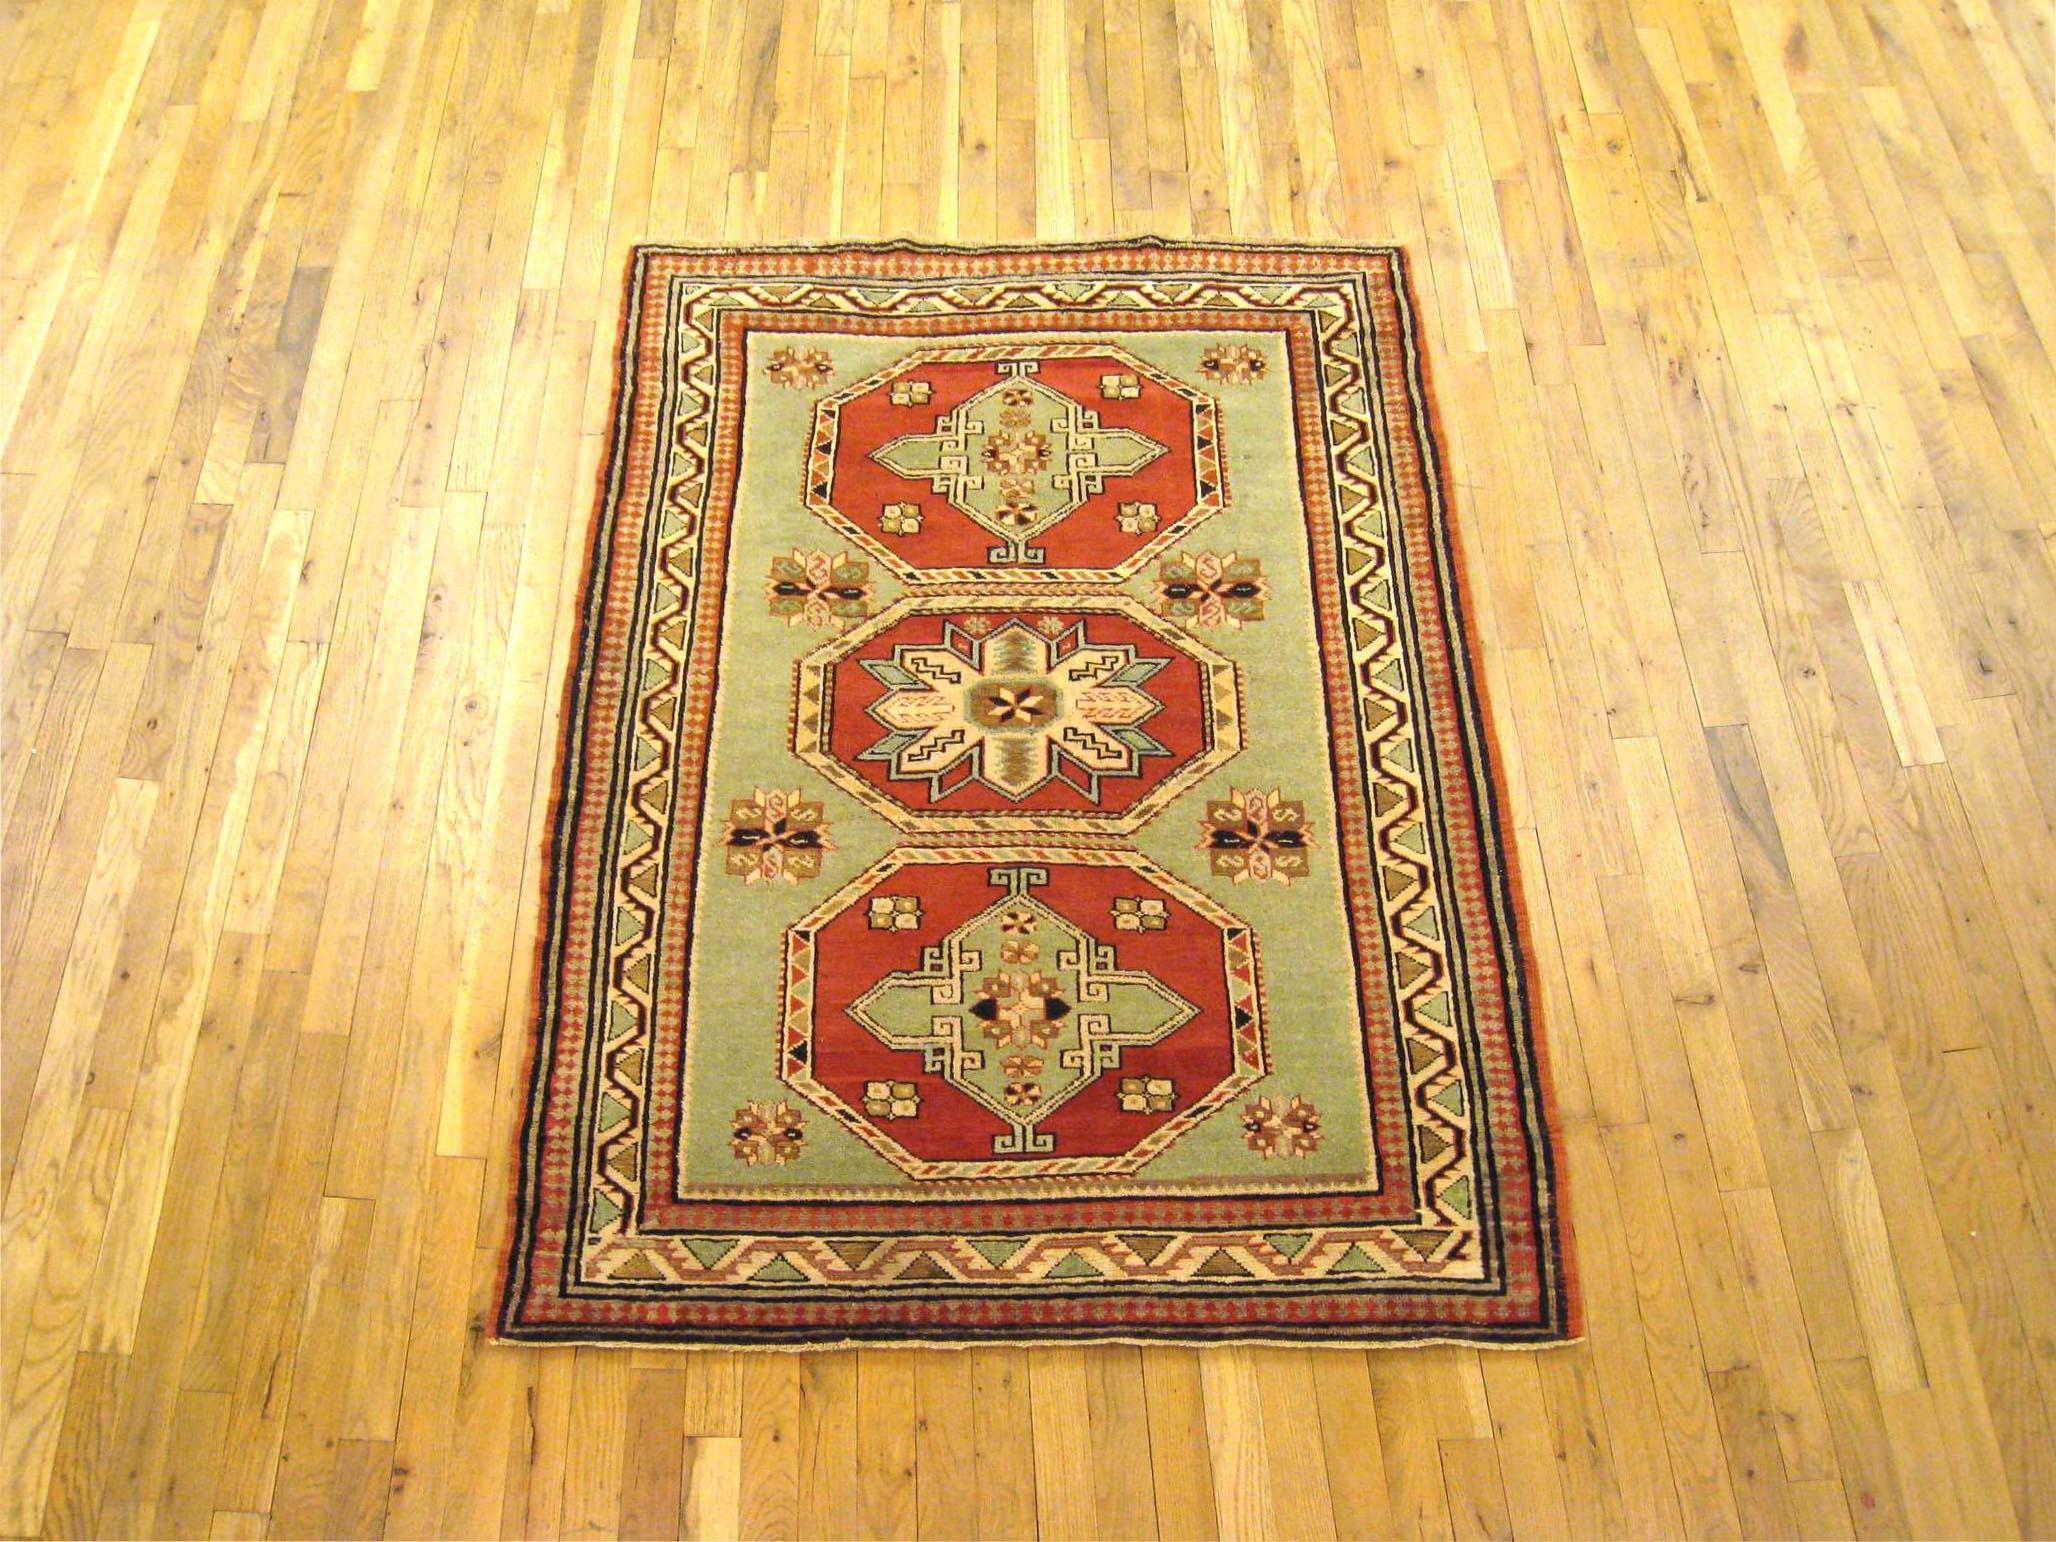 An antique Caucasian Kazak oriental rug, circa 1910-1920, size 5'3 H x 3'9 W. This handsome carpet has a multi-medallion design, with three lozenge medallions ensconced within the rarely found mint green primary field. The field is encased within a